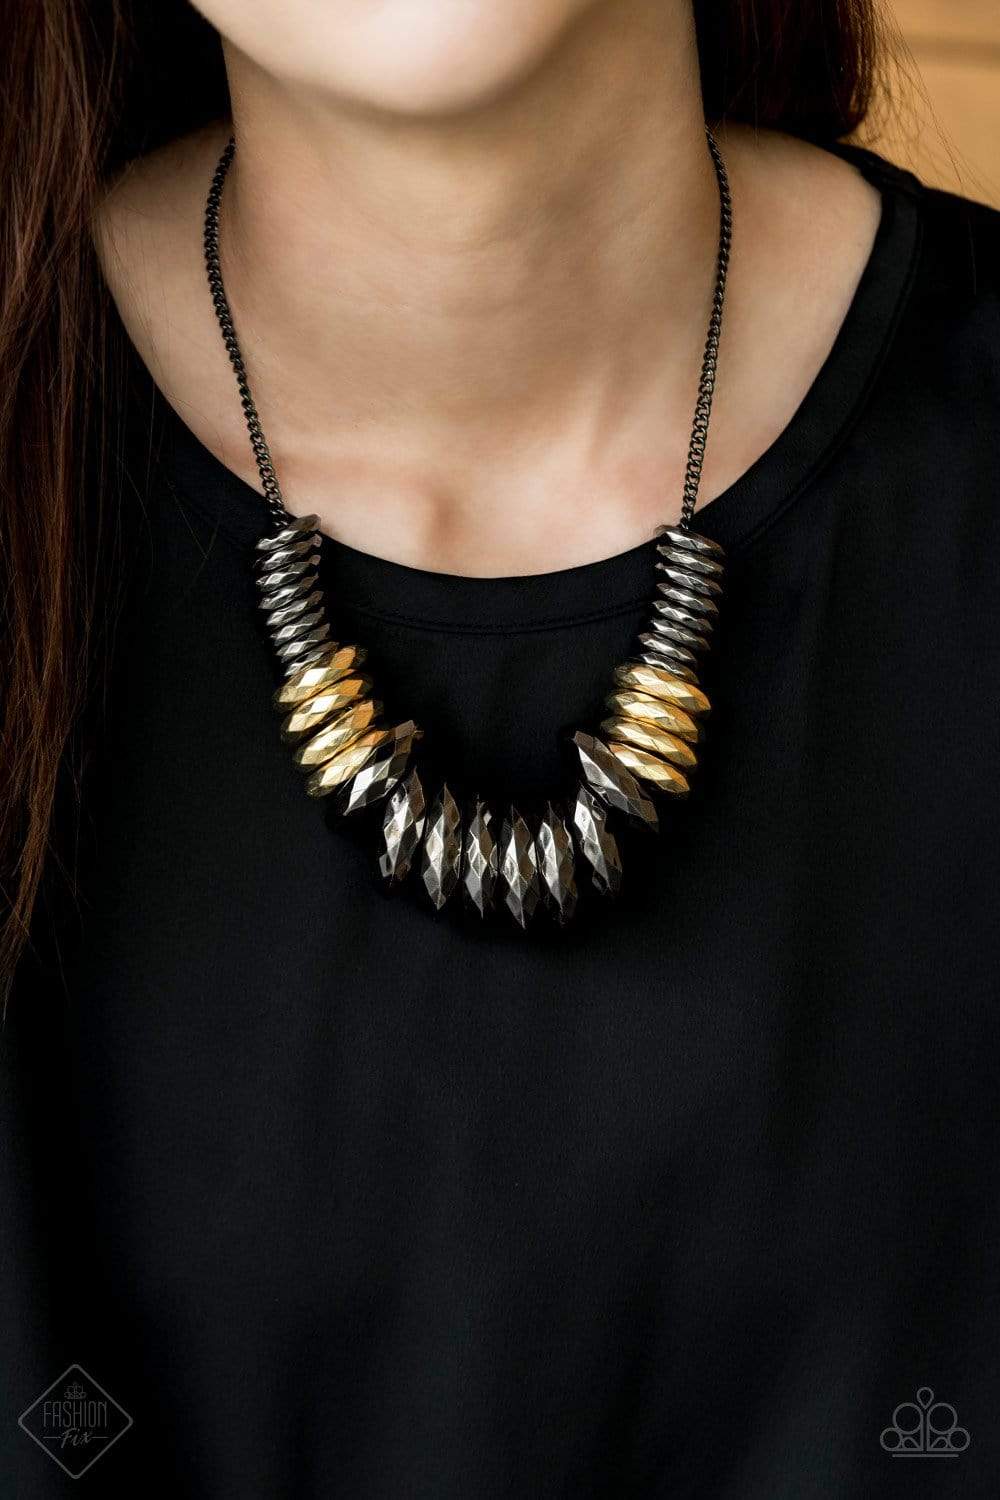 Gradually increasing in size, a collision of faceted gunmetal and gold rings slides along a classic gunmetal chain below the collar, creating a bold industrial statement piece. Features an adjustable clasp closure.